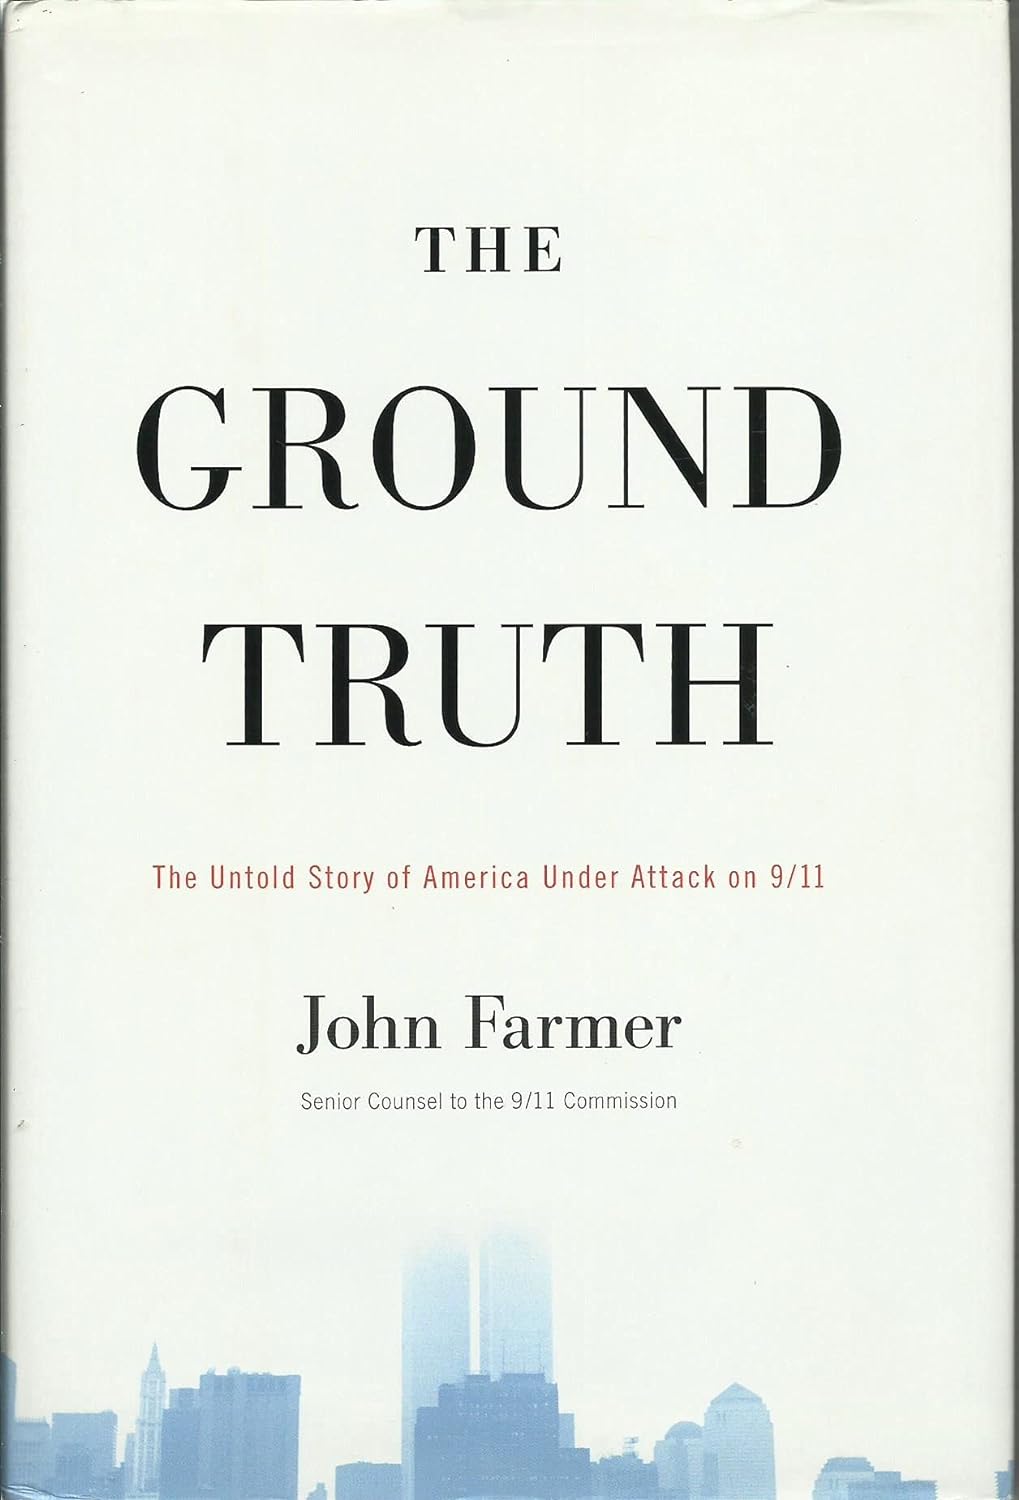 The Ground Truth book cover